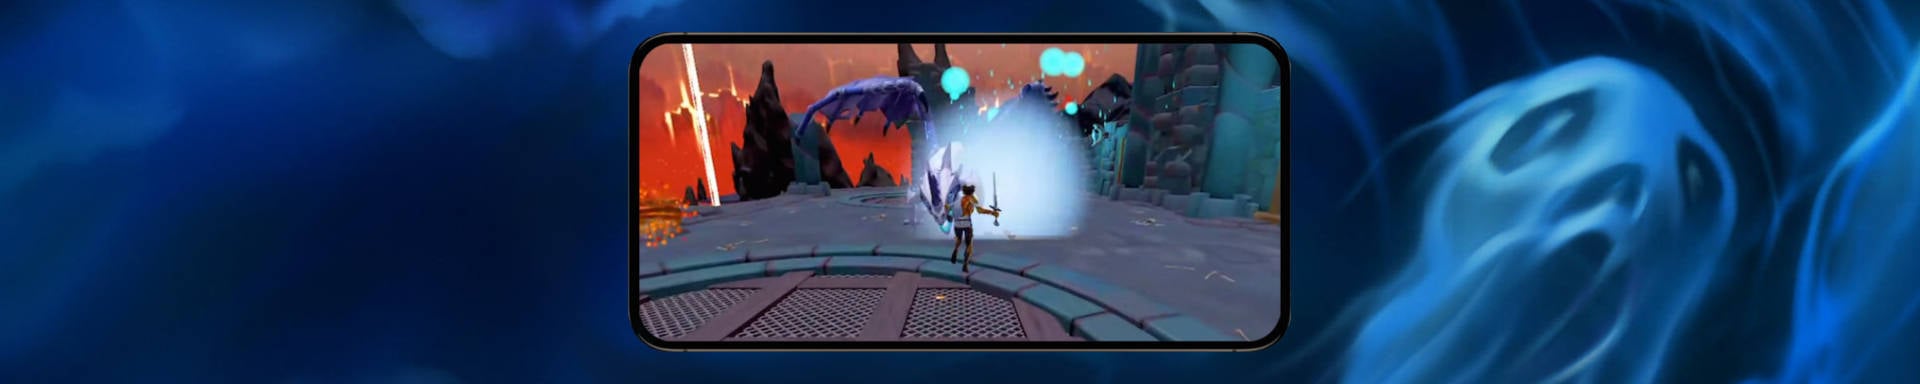 Runescape Android and IOS release date confirmed slice